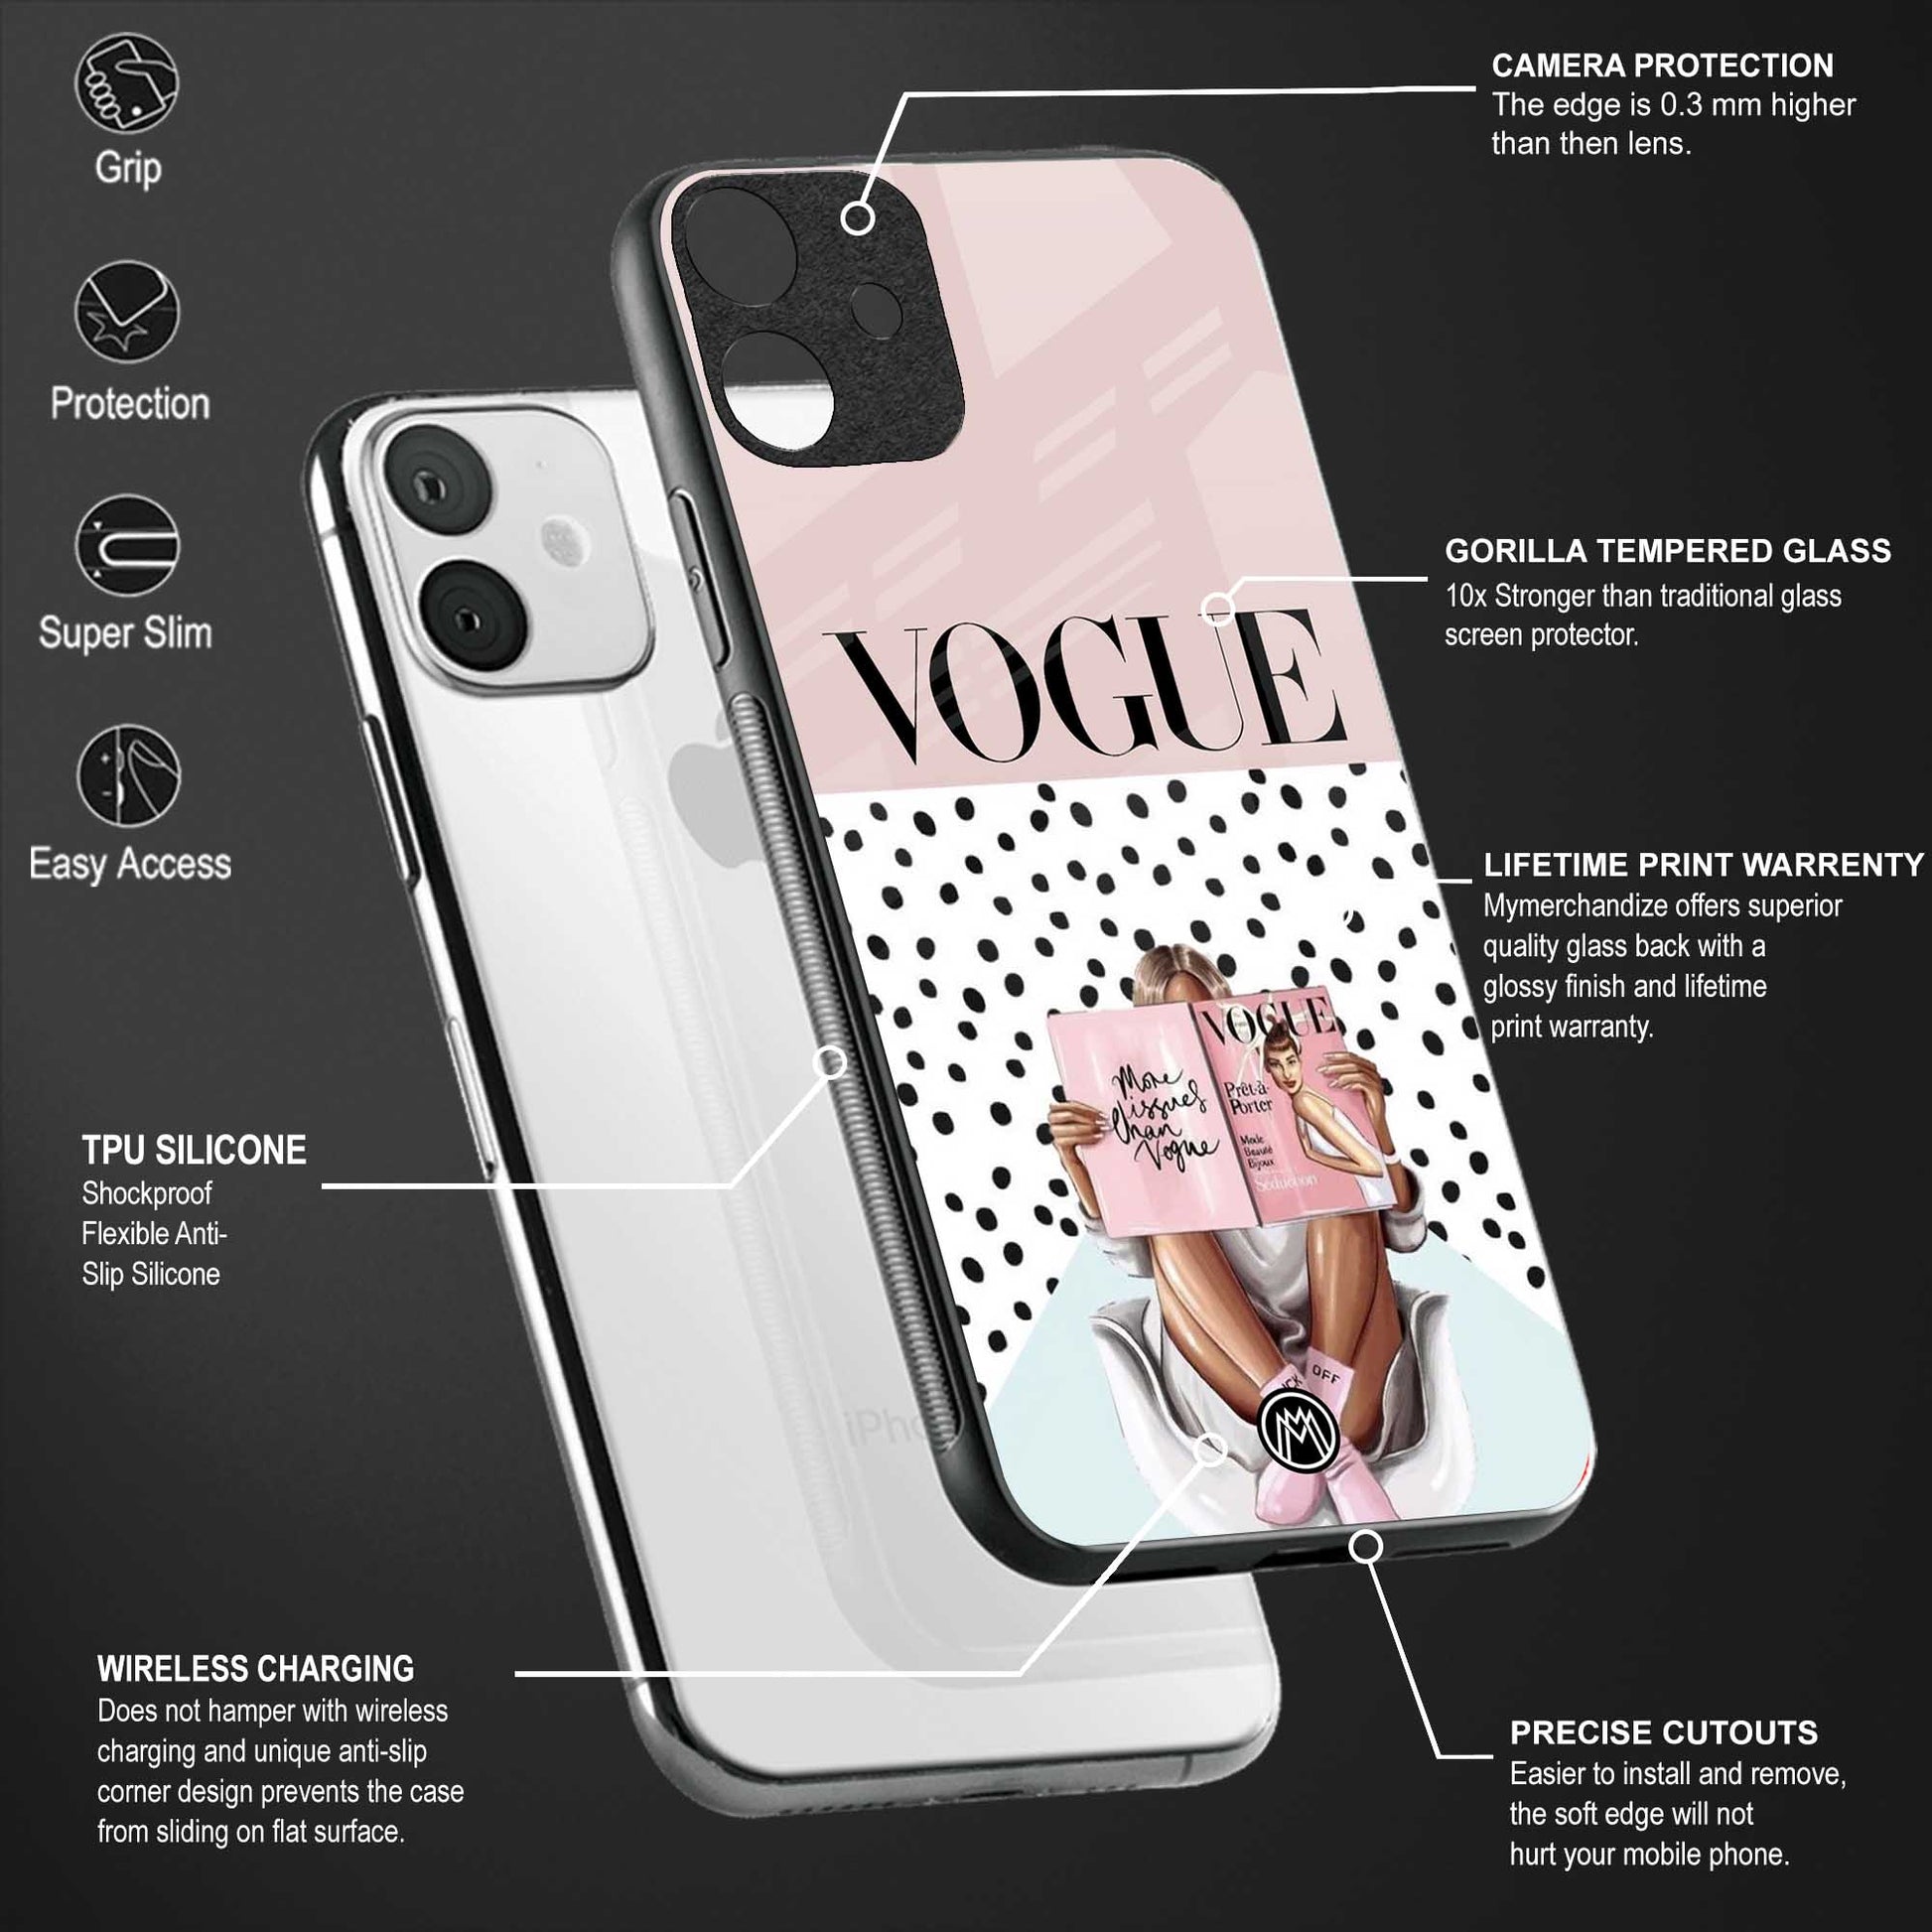 vogue queen glass case for samsung galaxy note 9 image-4